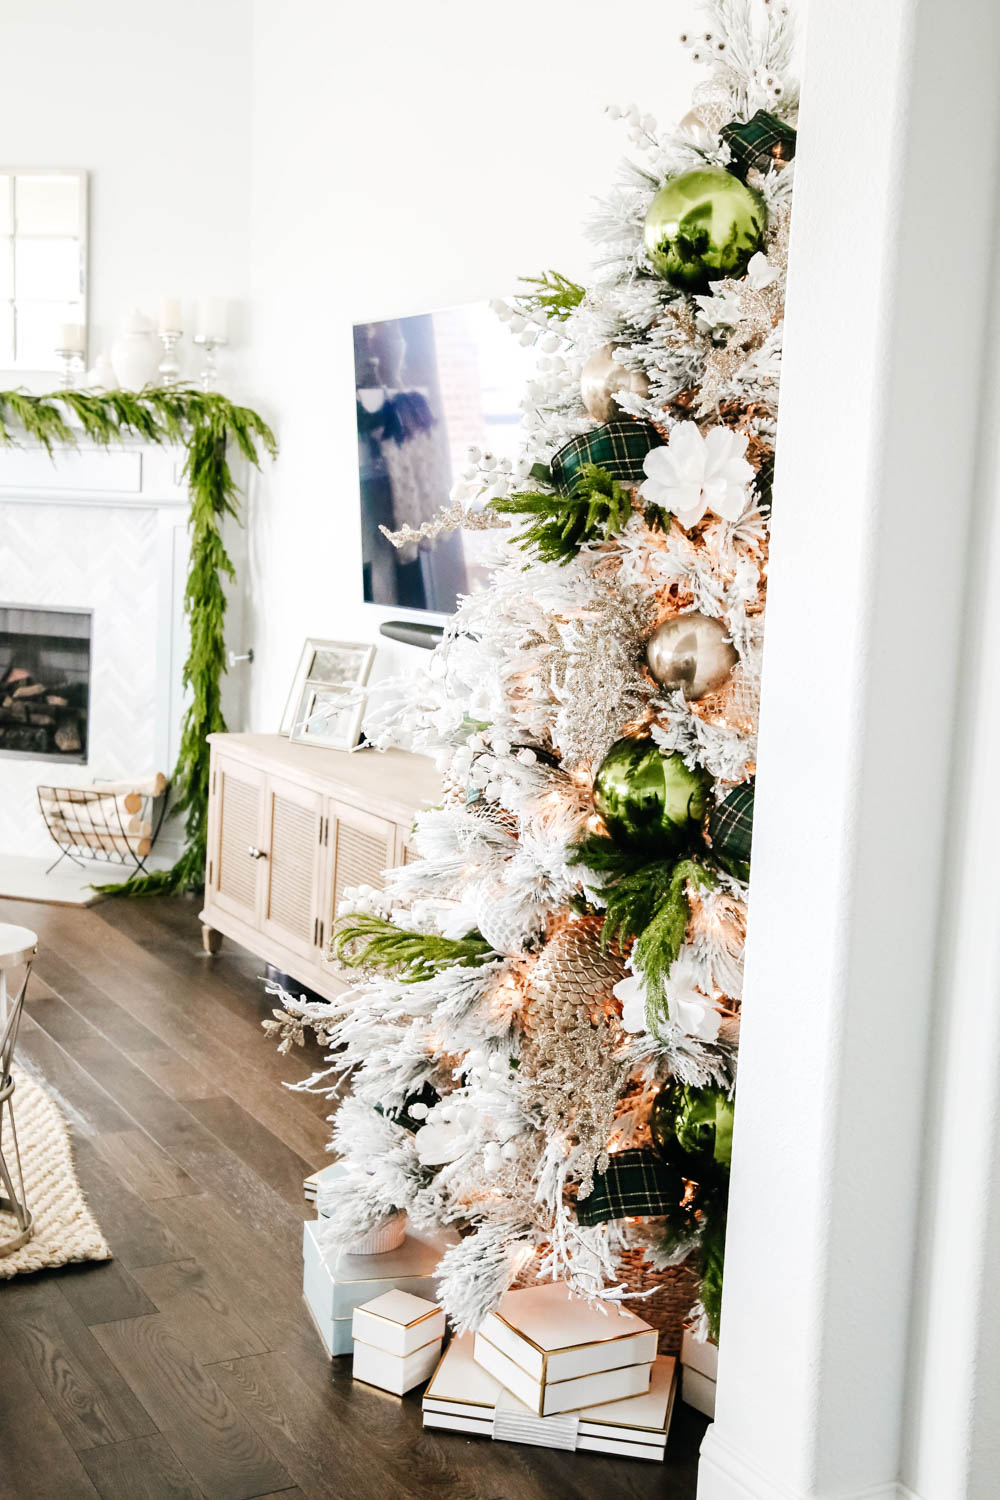 White and green Christmas tree + holiday decor ideas. #ABlissfulNest #christmastree #christmasdecor